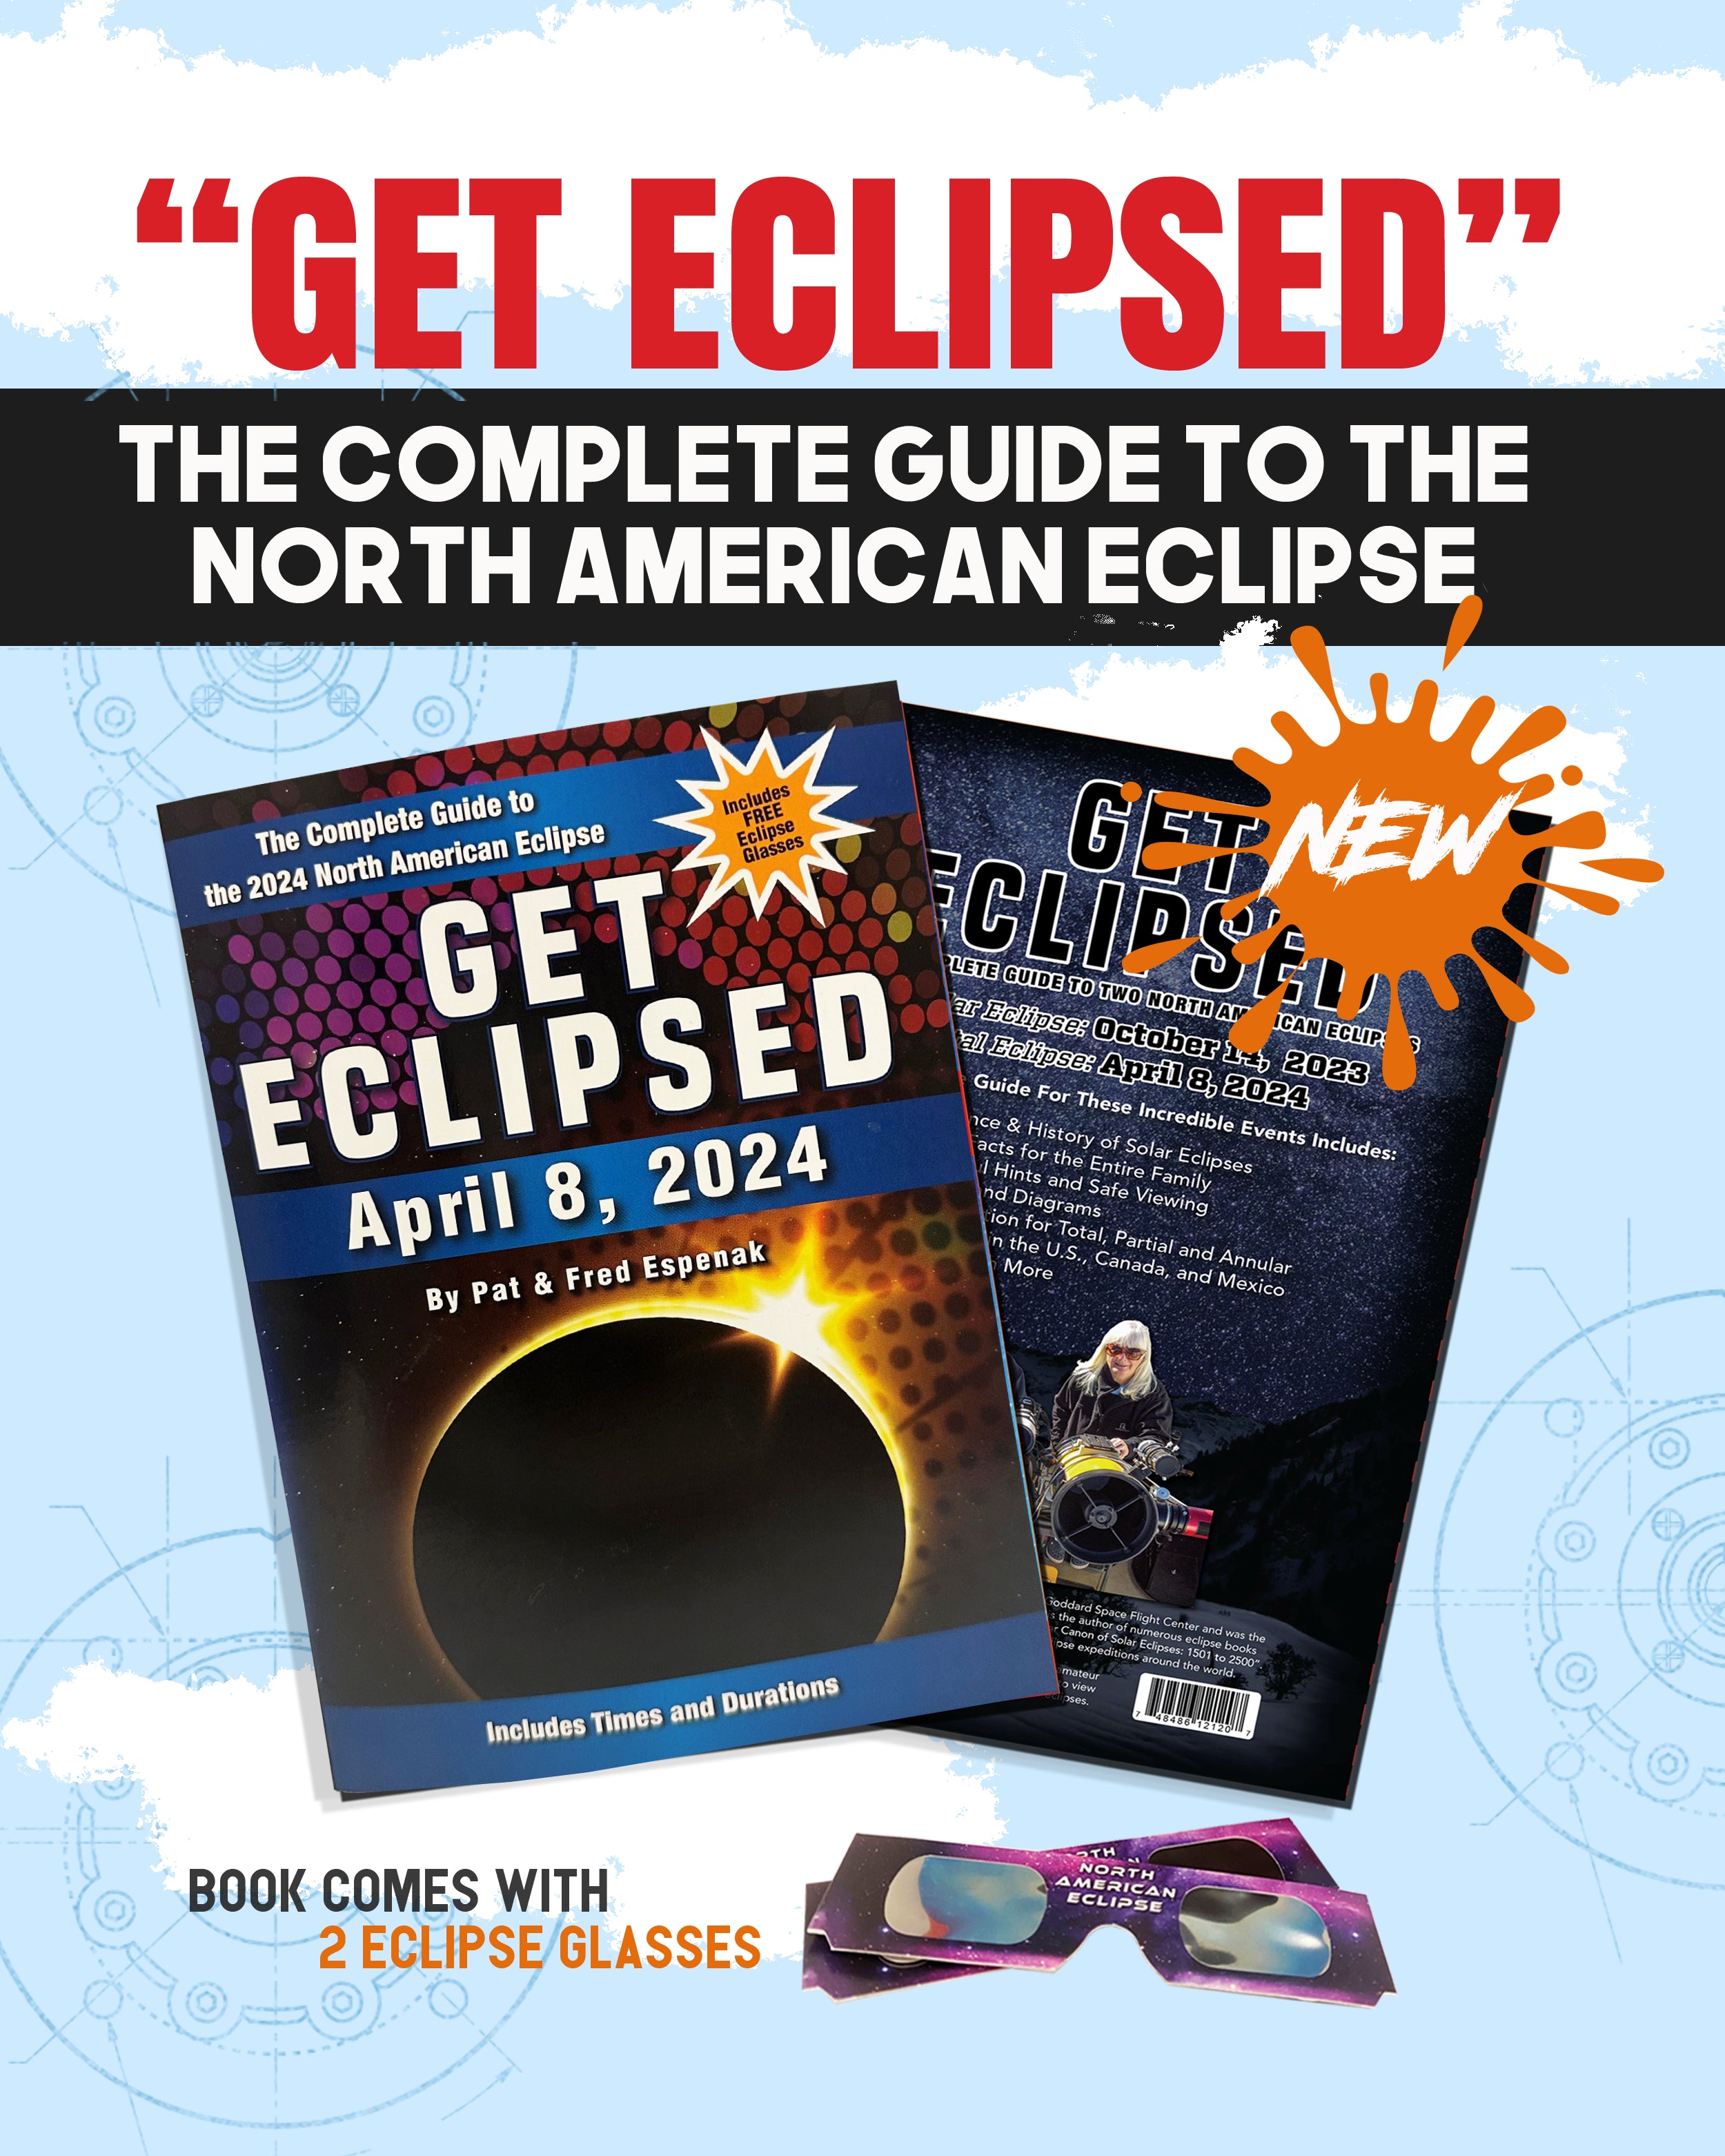 Upcoming Eclipse